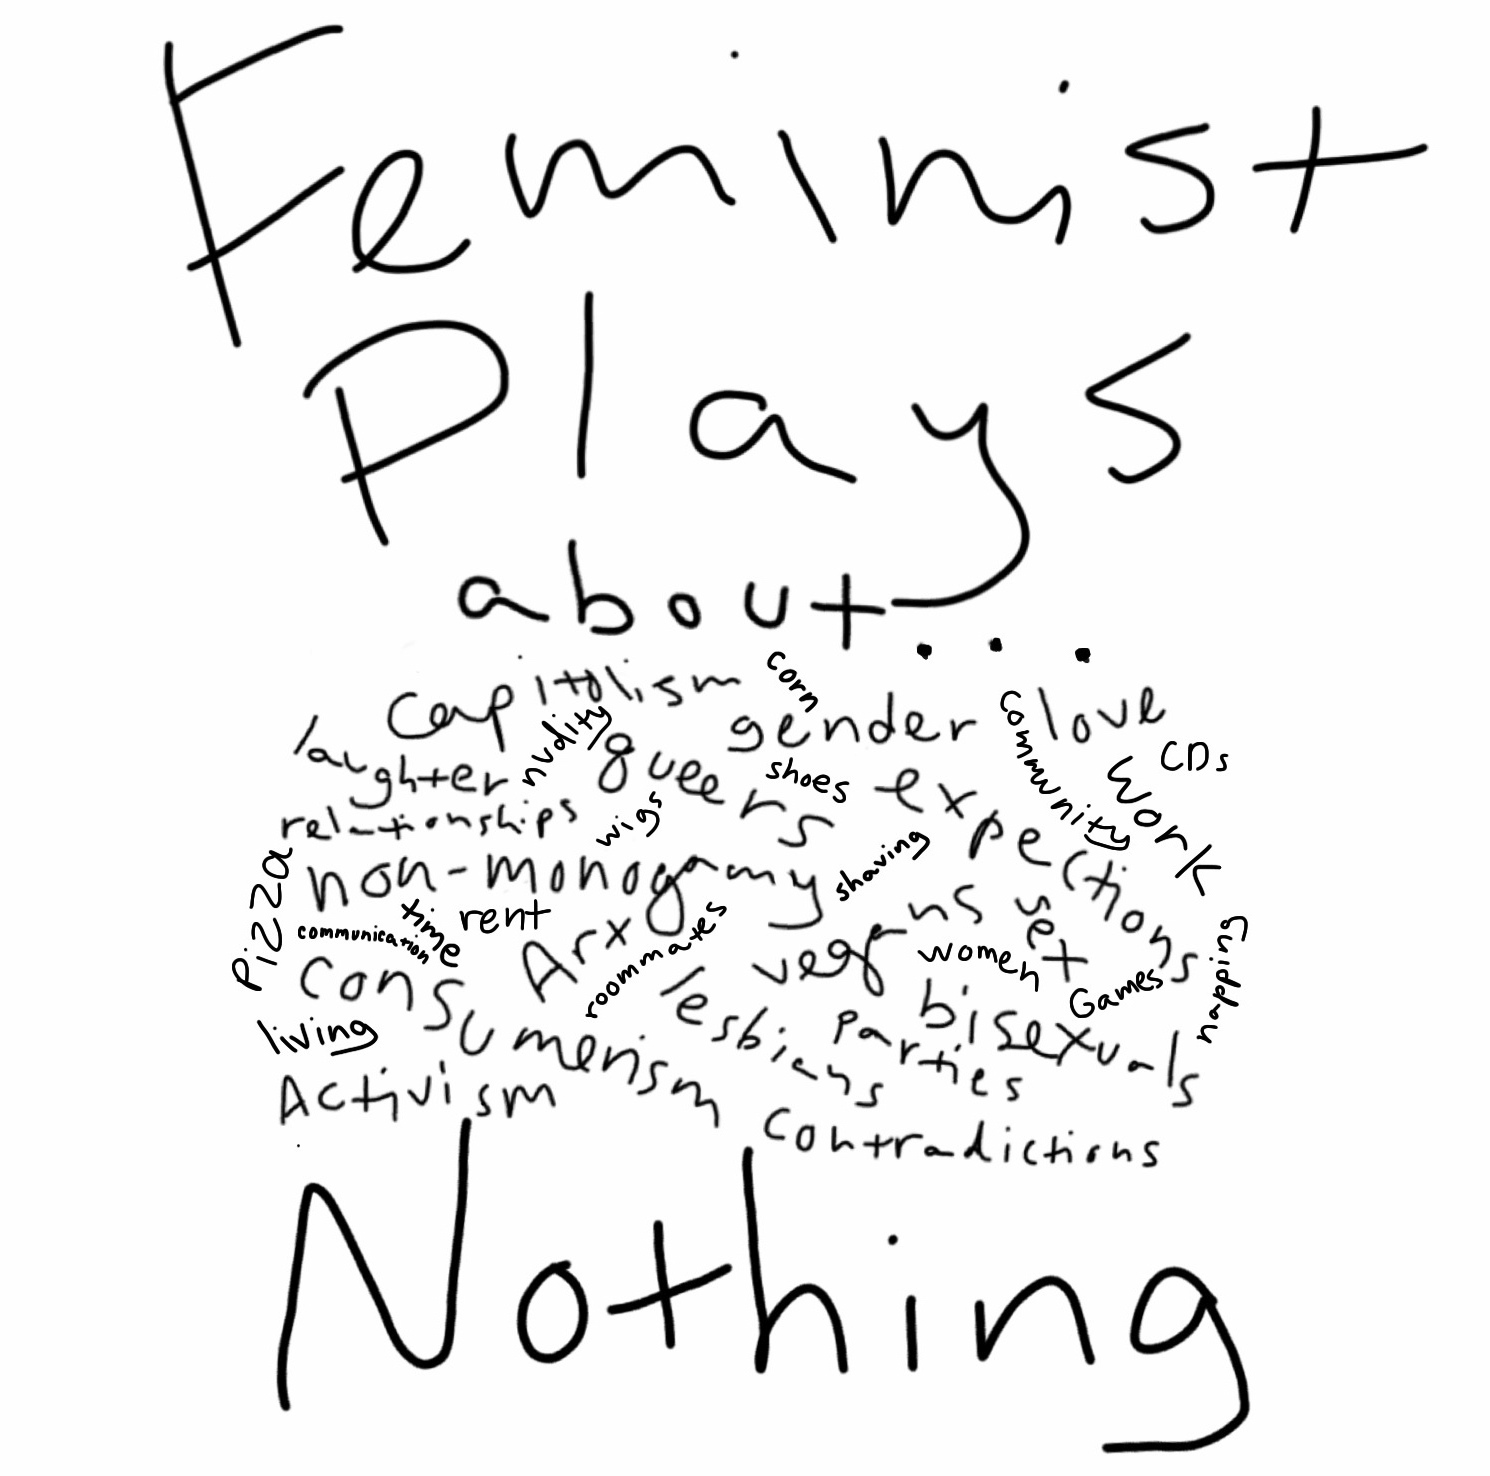 Feminist Plays about Nothing